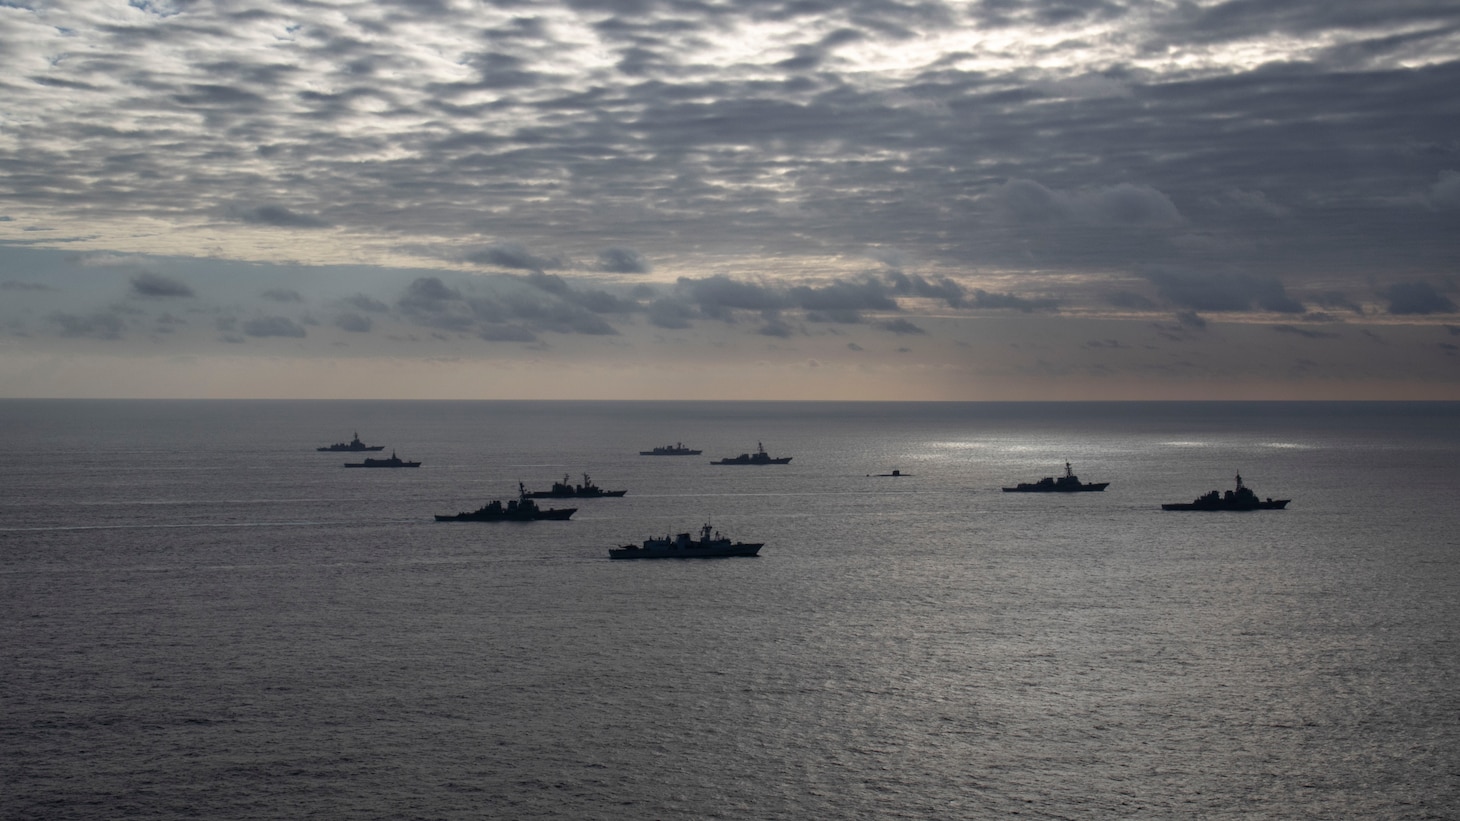 231110-N-TD381-1205 PHILIPPINE SEA (Nov. 10, 2023) Ships from the Japan Maritime Self-Defense Force, Royal Australian Navy, Royal Canadian Navy and United States Navy sail in formation during Annual Exercise (ANNUALEX) 2023. ANNUALEX is a multilateral exercise conducted by naval elements of the Royal Australian, Royal Canadian, Japan Maritime Self-Defense Force, and U.S. navies to demonstrate naval interoperability and a joint commitment to a free and open Indo-Pacific. Vinson, flagship of Carrier Strike Group ONE, is deployed to the U.S. 7th Fleet area of operations in support of a free and open Indo-Pacific. (U.S. Navy photo by Mass Communication Specialist 3rd Class Isaiah Goessl)